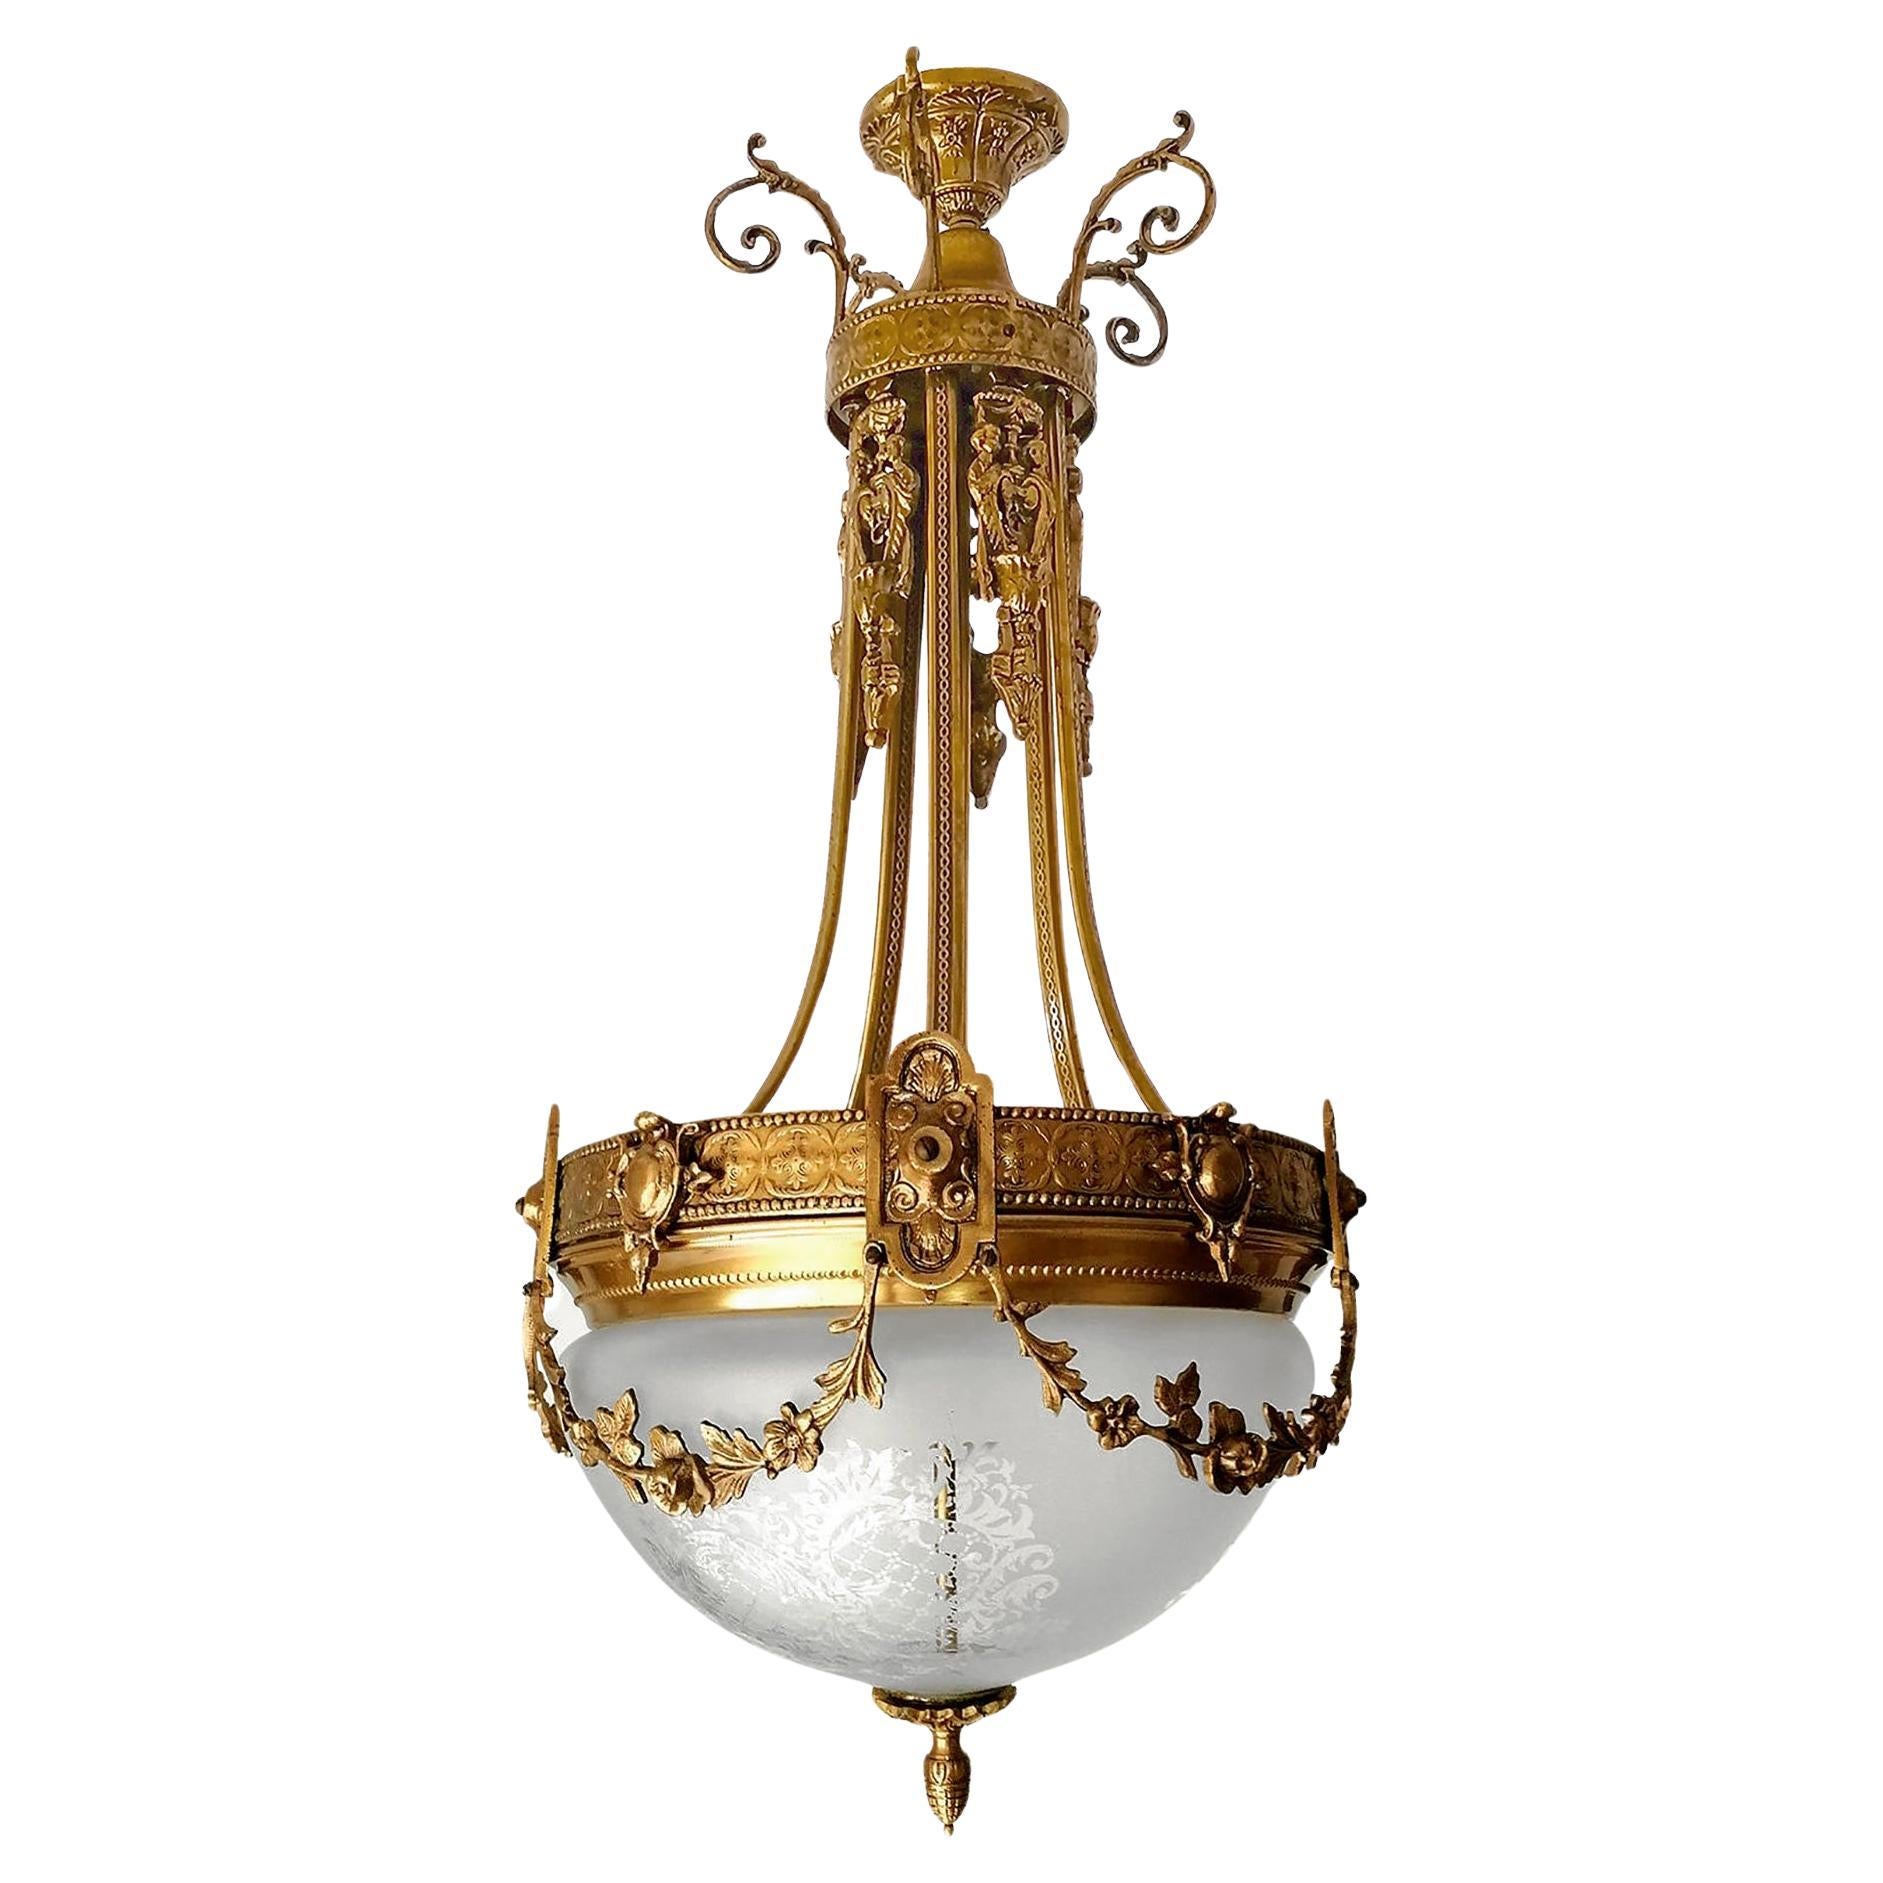 20th Century French Art Nouveau and Art Deco Chandelier in Gilt Bronze and Empire Caryatids For Sale